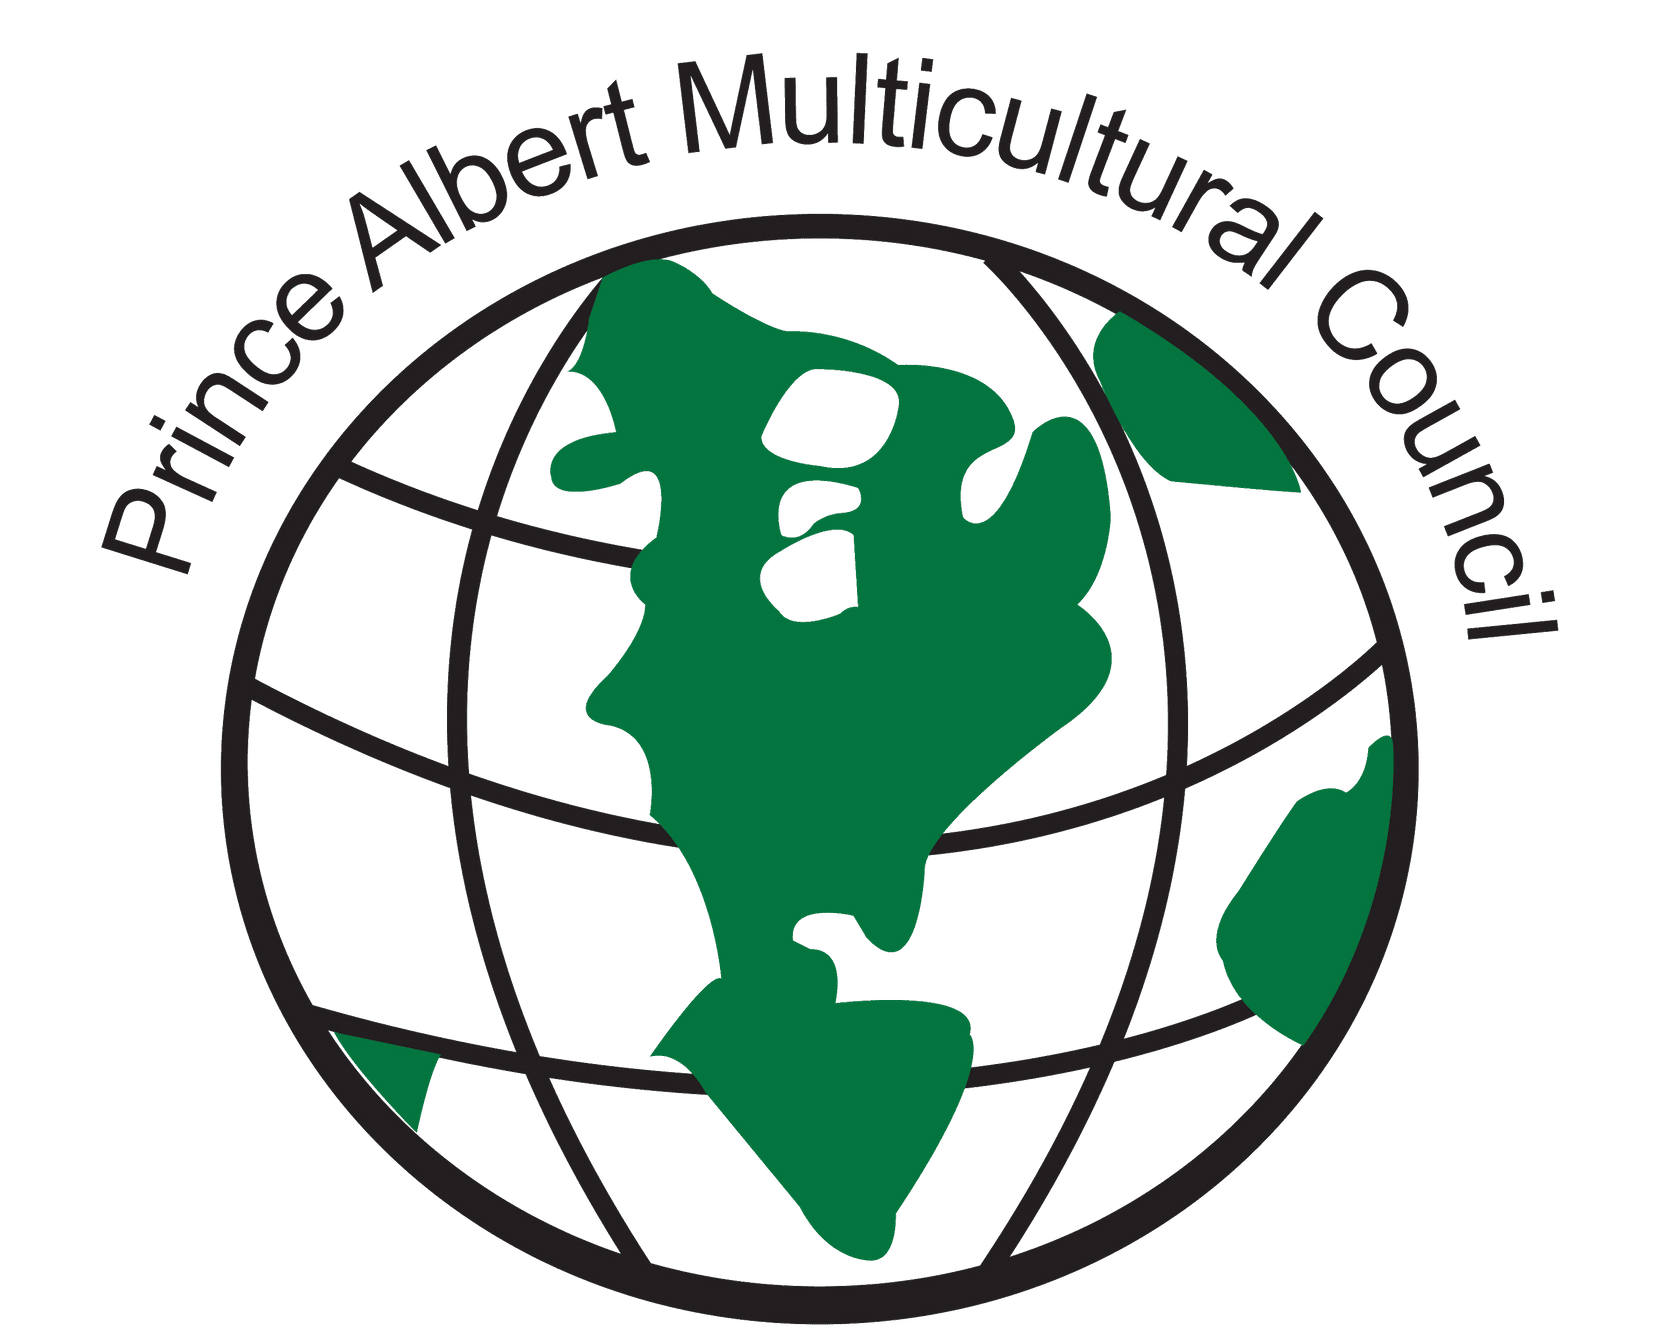 Prince Albert Multicultural Council